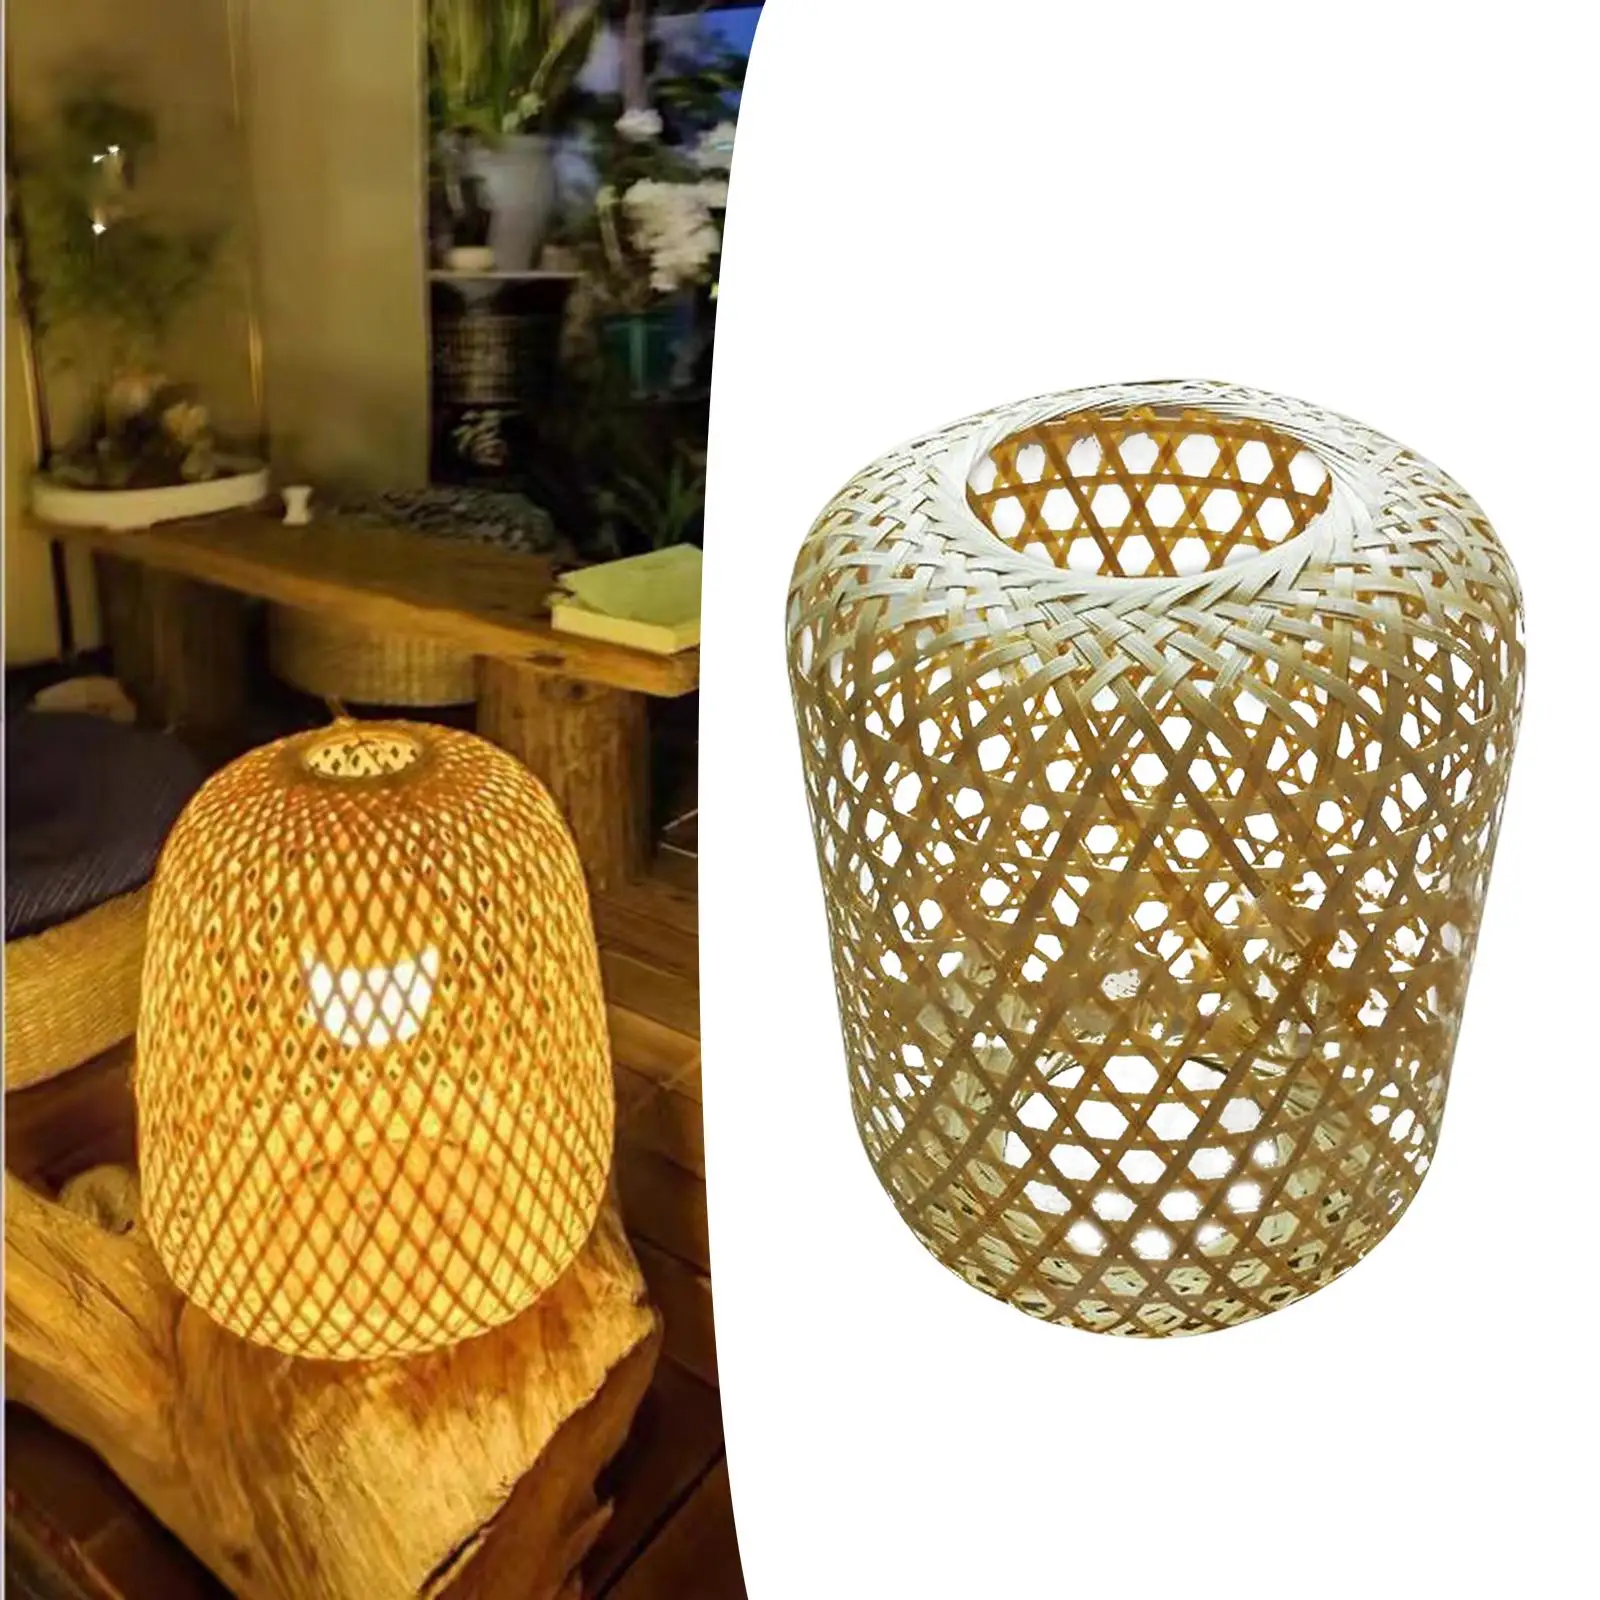 Rustic Bamboo Lamp Shade Ceiling Light Fixture Cover Pendant Light Decorative Chandelier Fitting for Bedroom Living Room Dorm